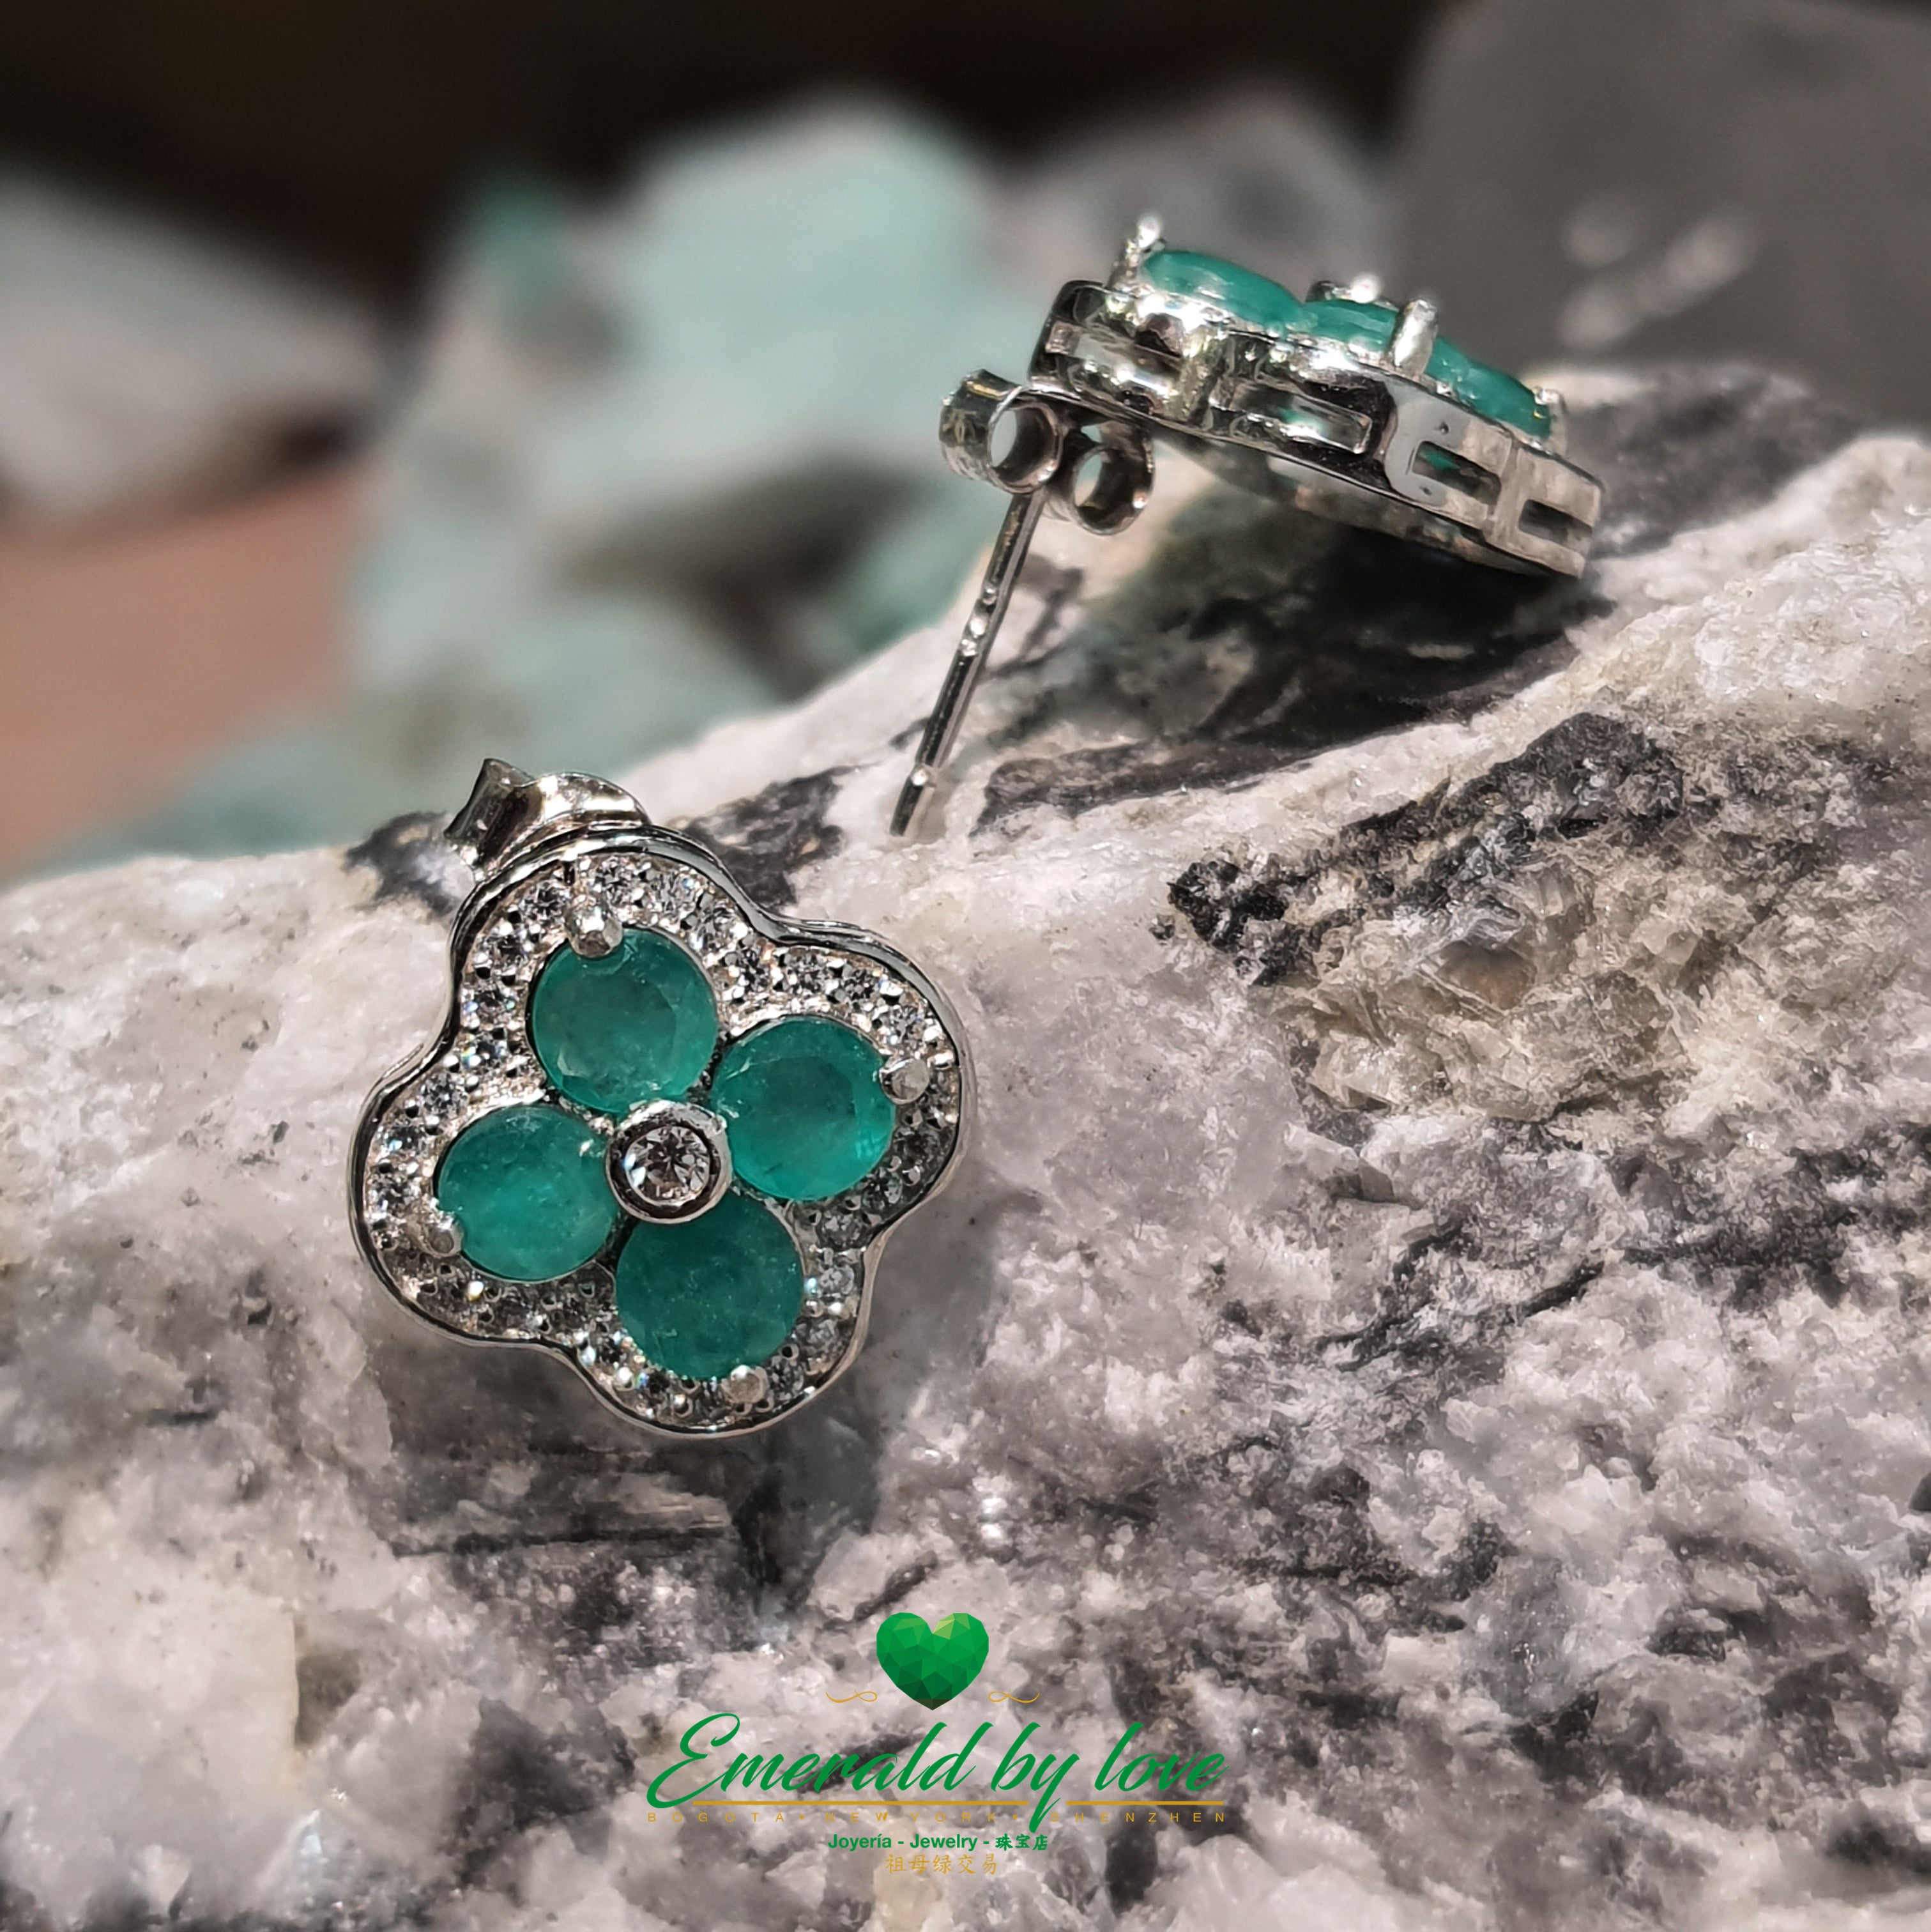 Sterling Silver Four-Leaf Clover Earrings Adorned with Colombian Emeralds and Cubic Zirconia